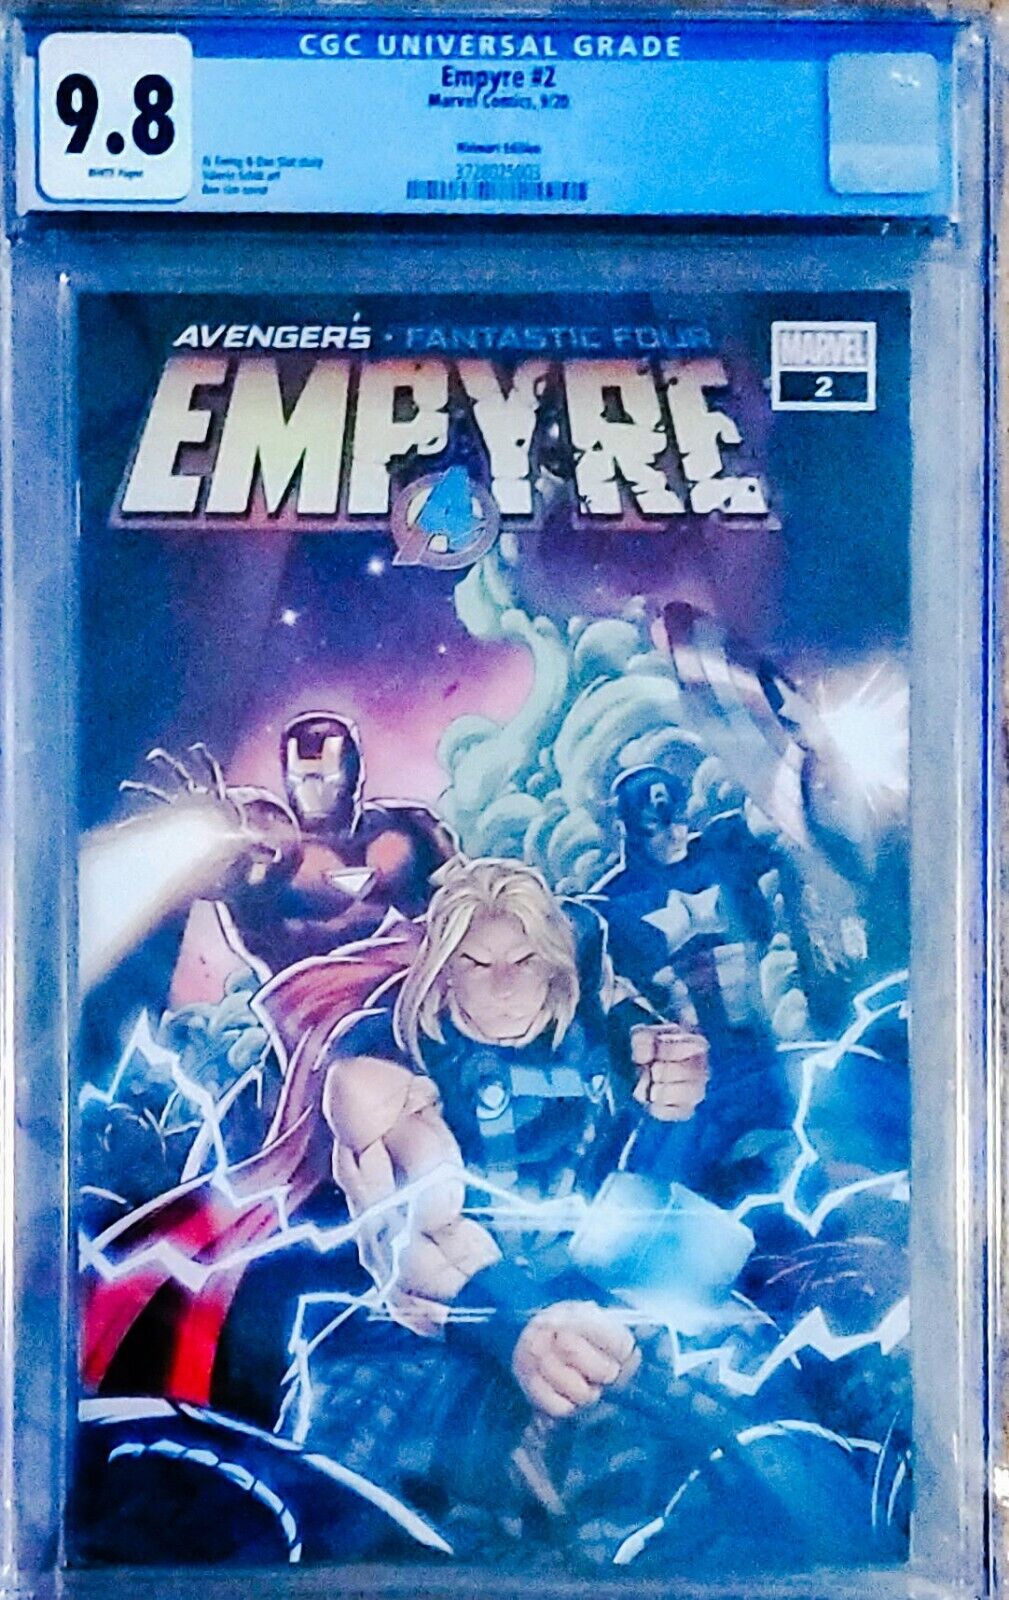 Empyre 2 Wal-Mart Edition CGC 9.8 Ron Lim Cover